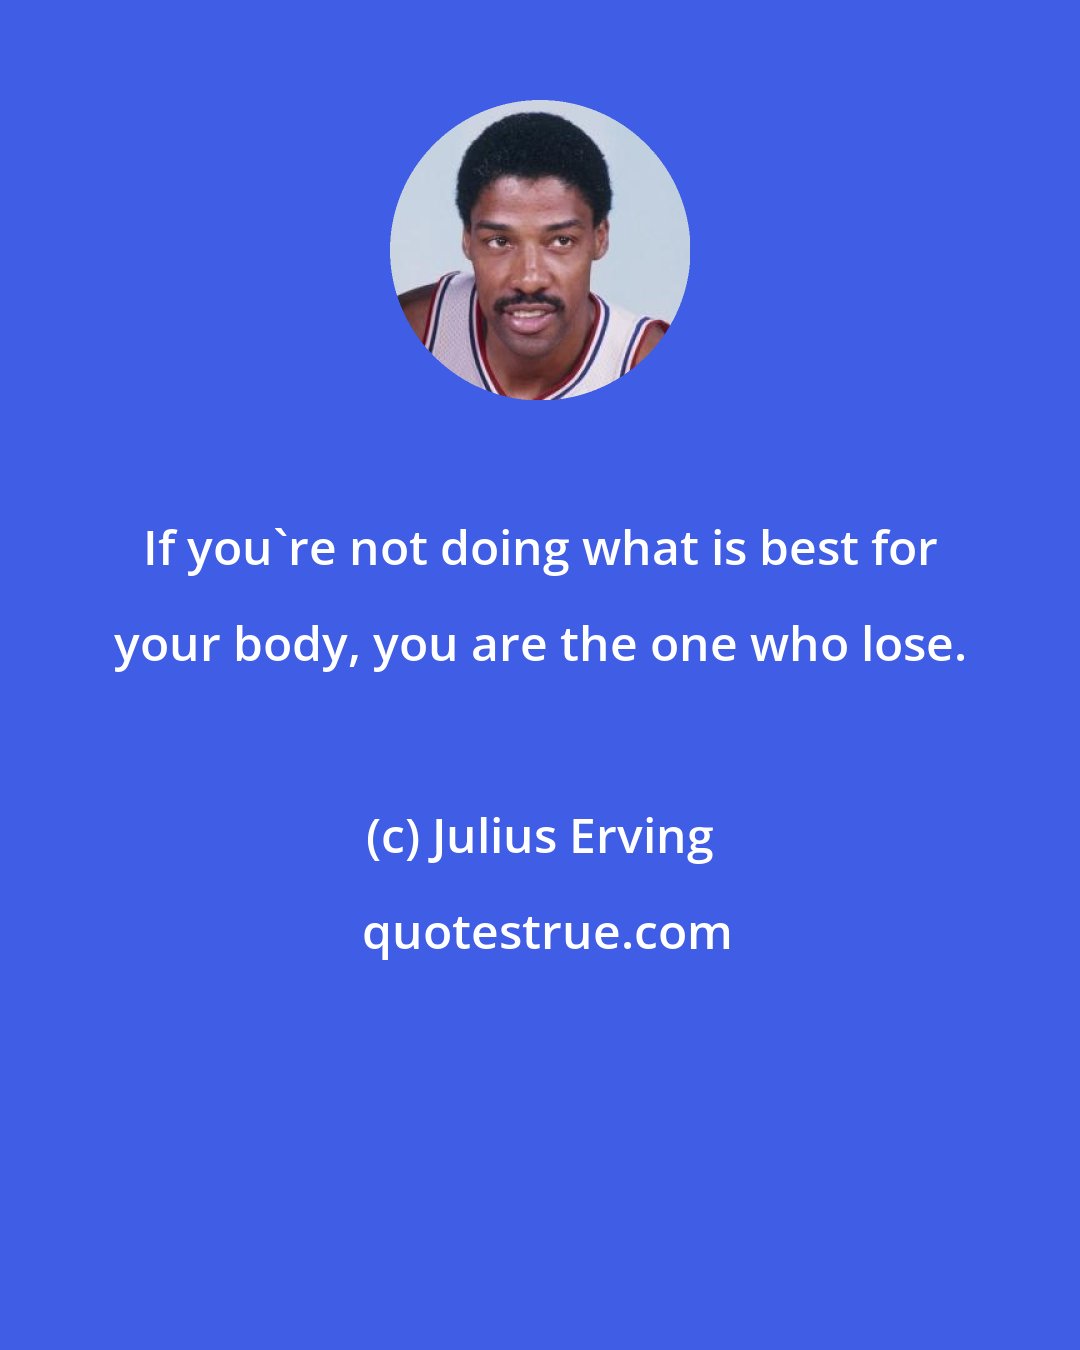 Julius Erving: If you're not doing what is best for your body, you are the one who lose.